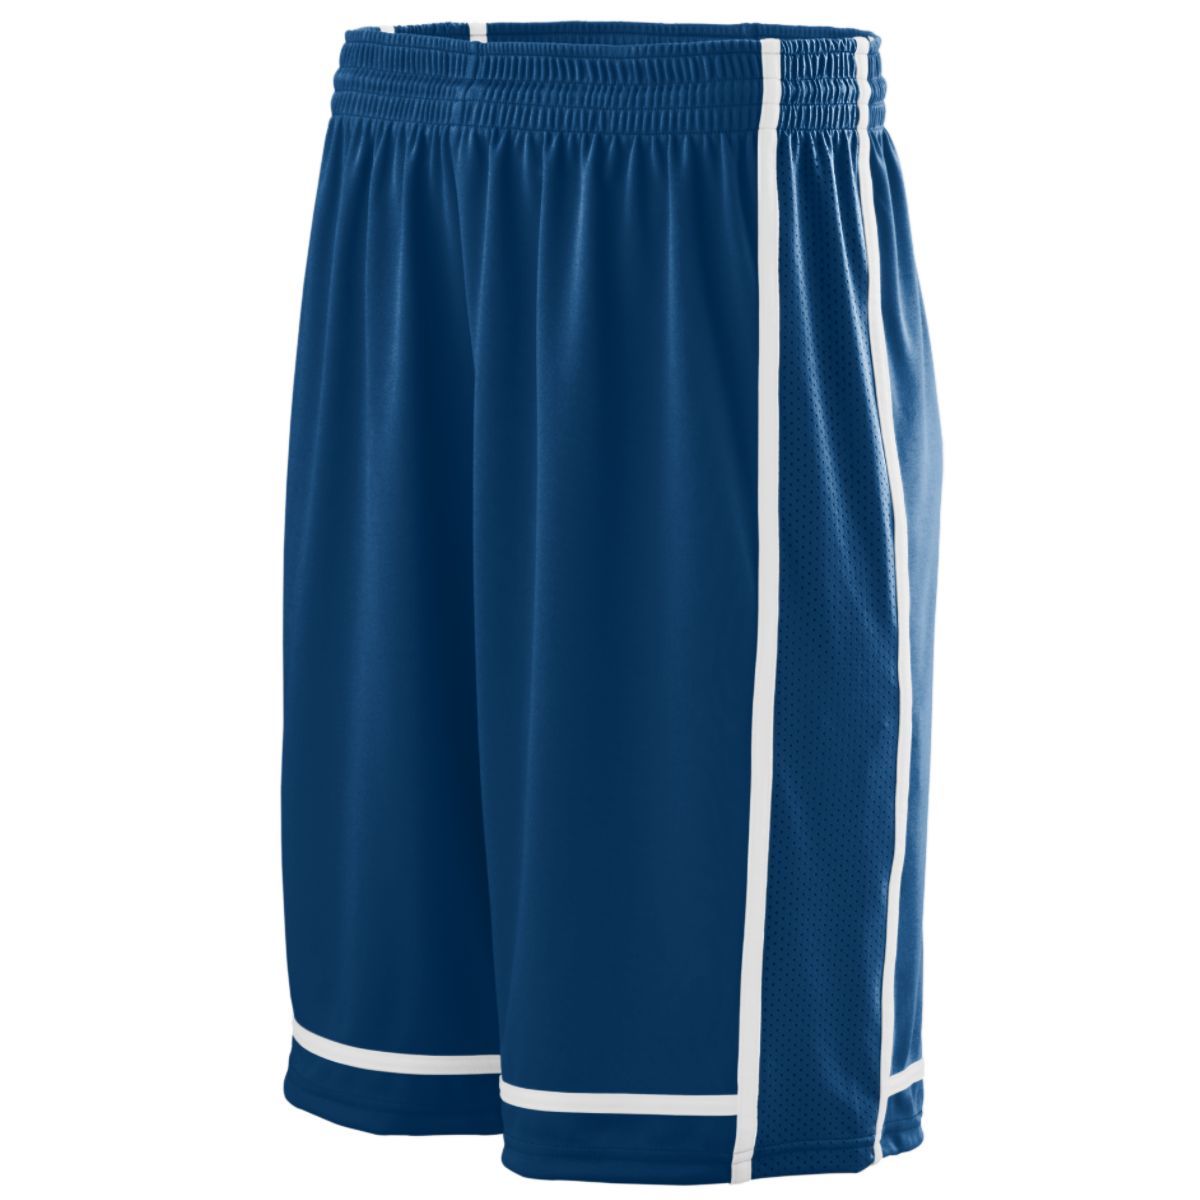 Augusta Sportswear Winning Streak Shorts in Navy/White  -Part of the Adult, Adult-Shorts, Augusta-Products, Basketball, All-Sports, All-Sports-1 product lines at KanaleyCreations.com